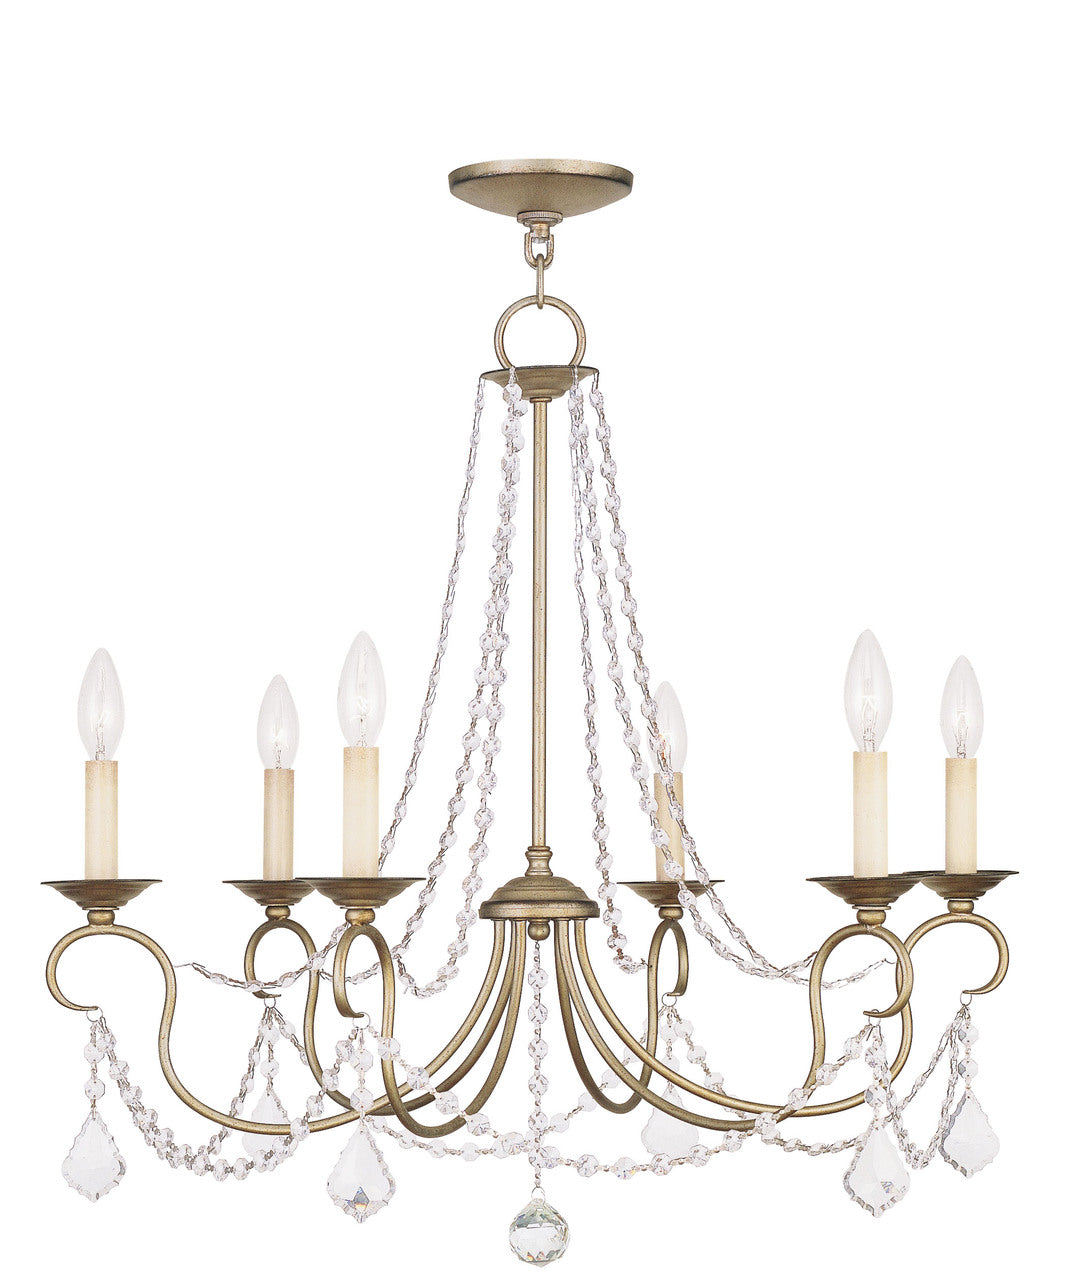 LIVEX Lighting 6516-73 Pennington Chandelier with Hand-Painted Antique Silver Leaves (6 Light)